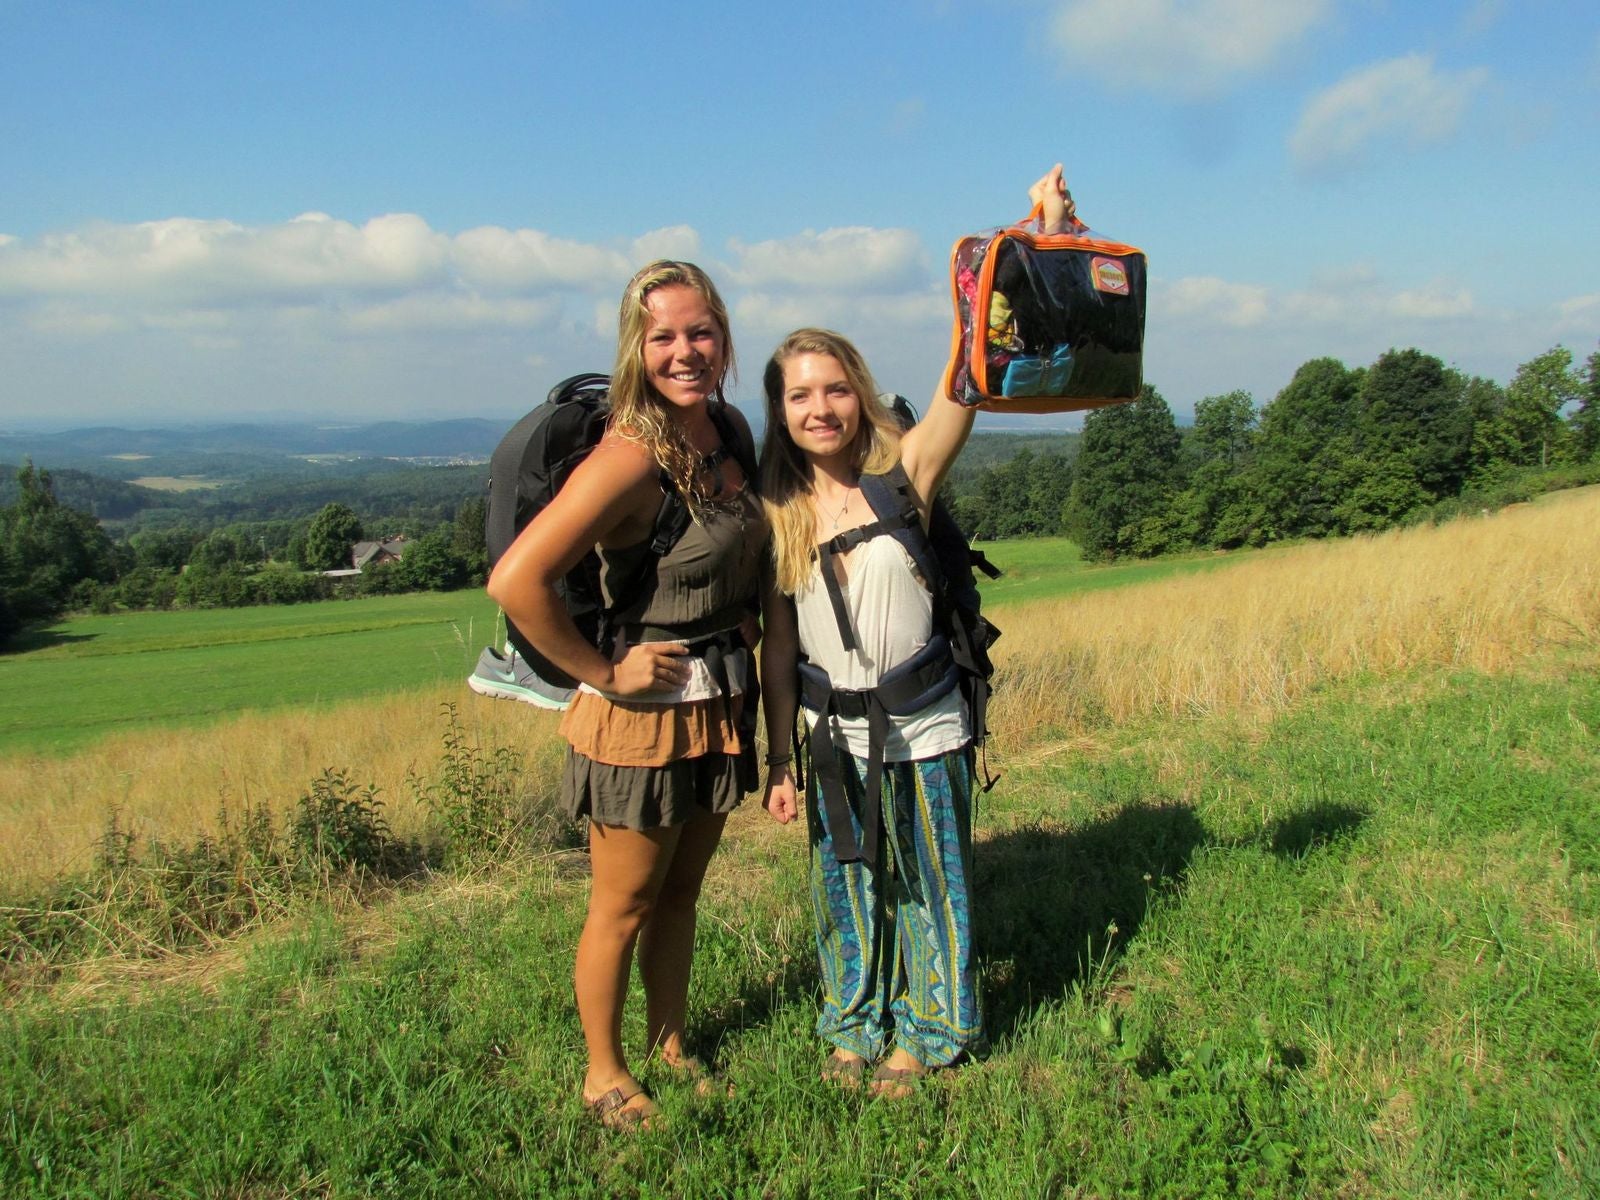 two ladies on a hiking trip with a large orange cube